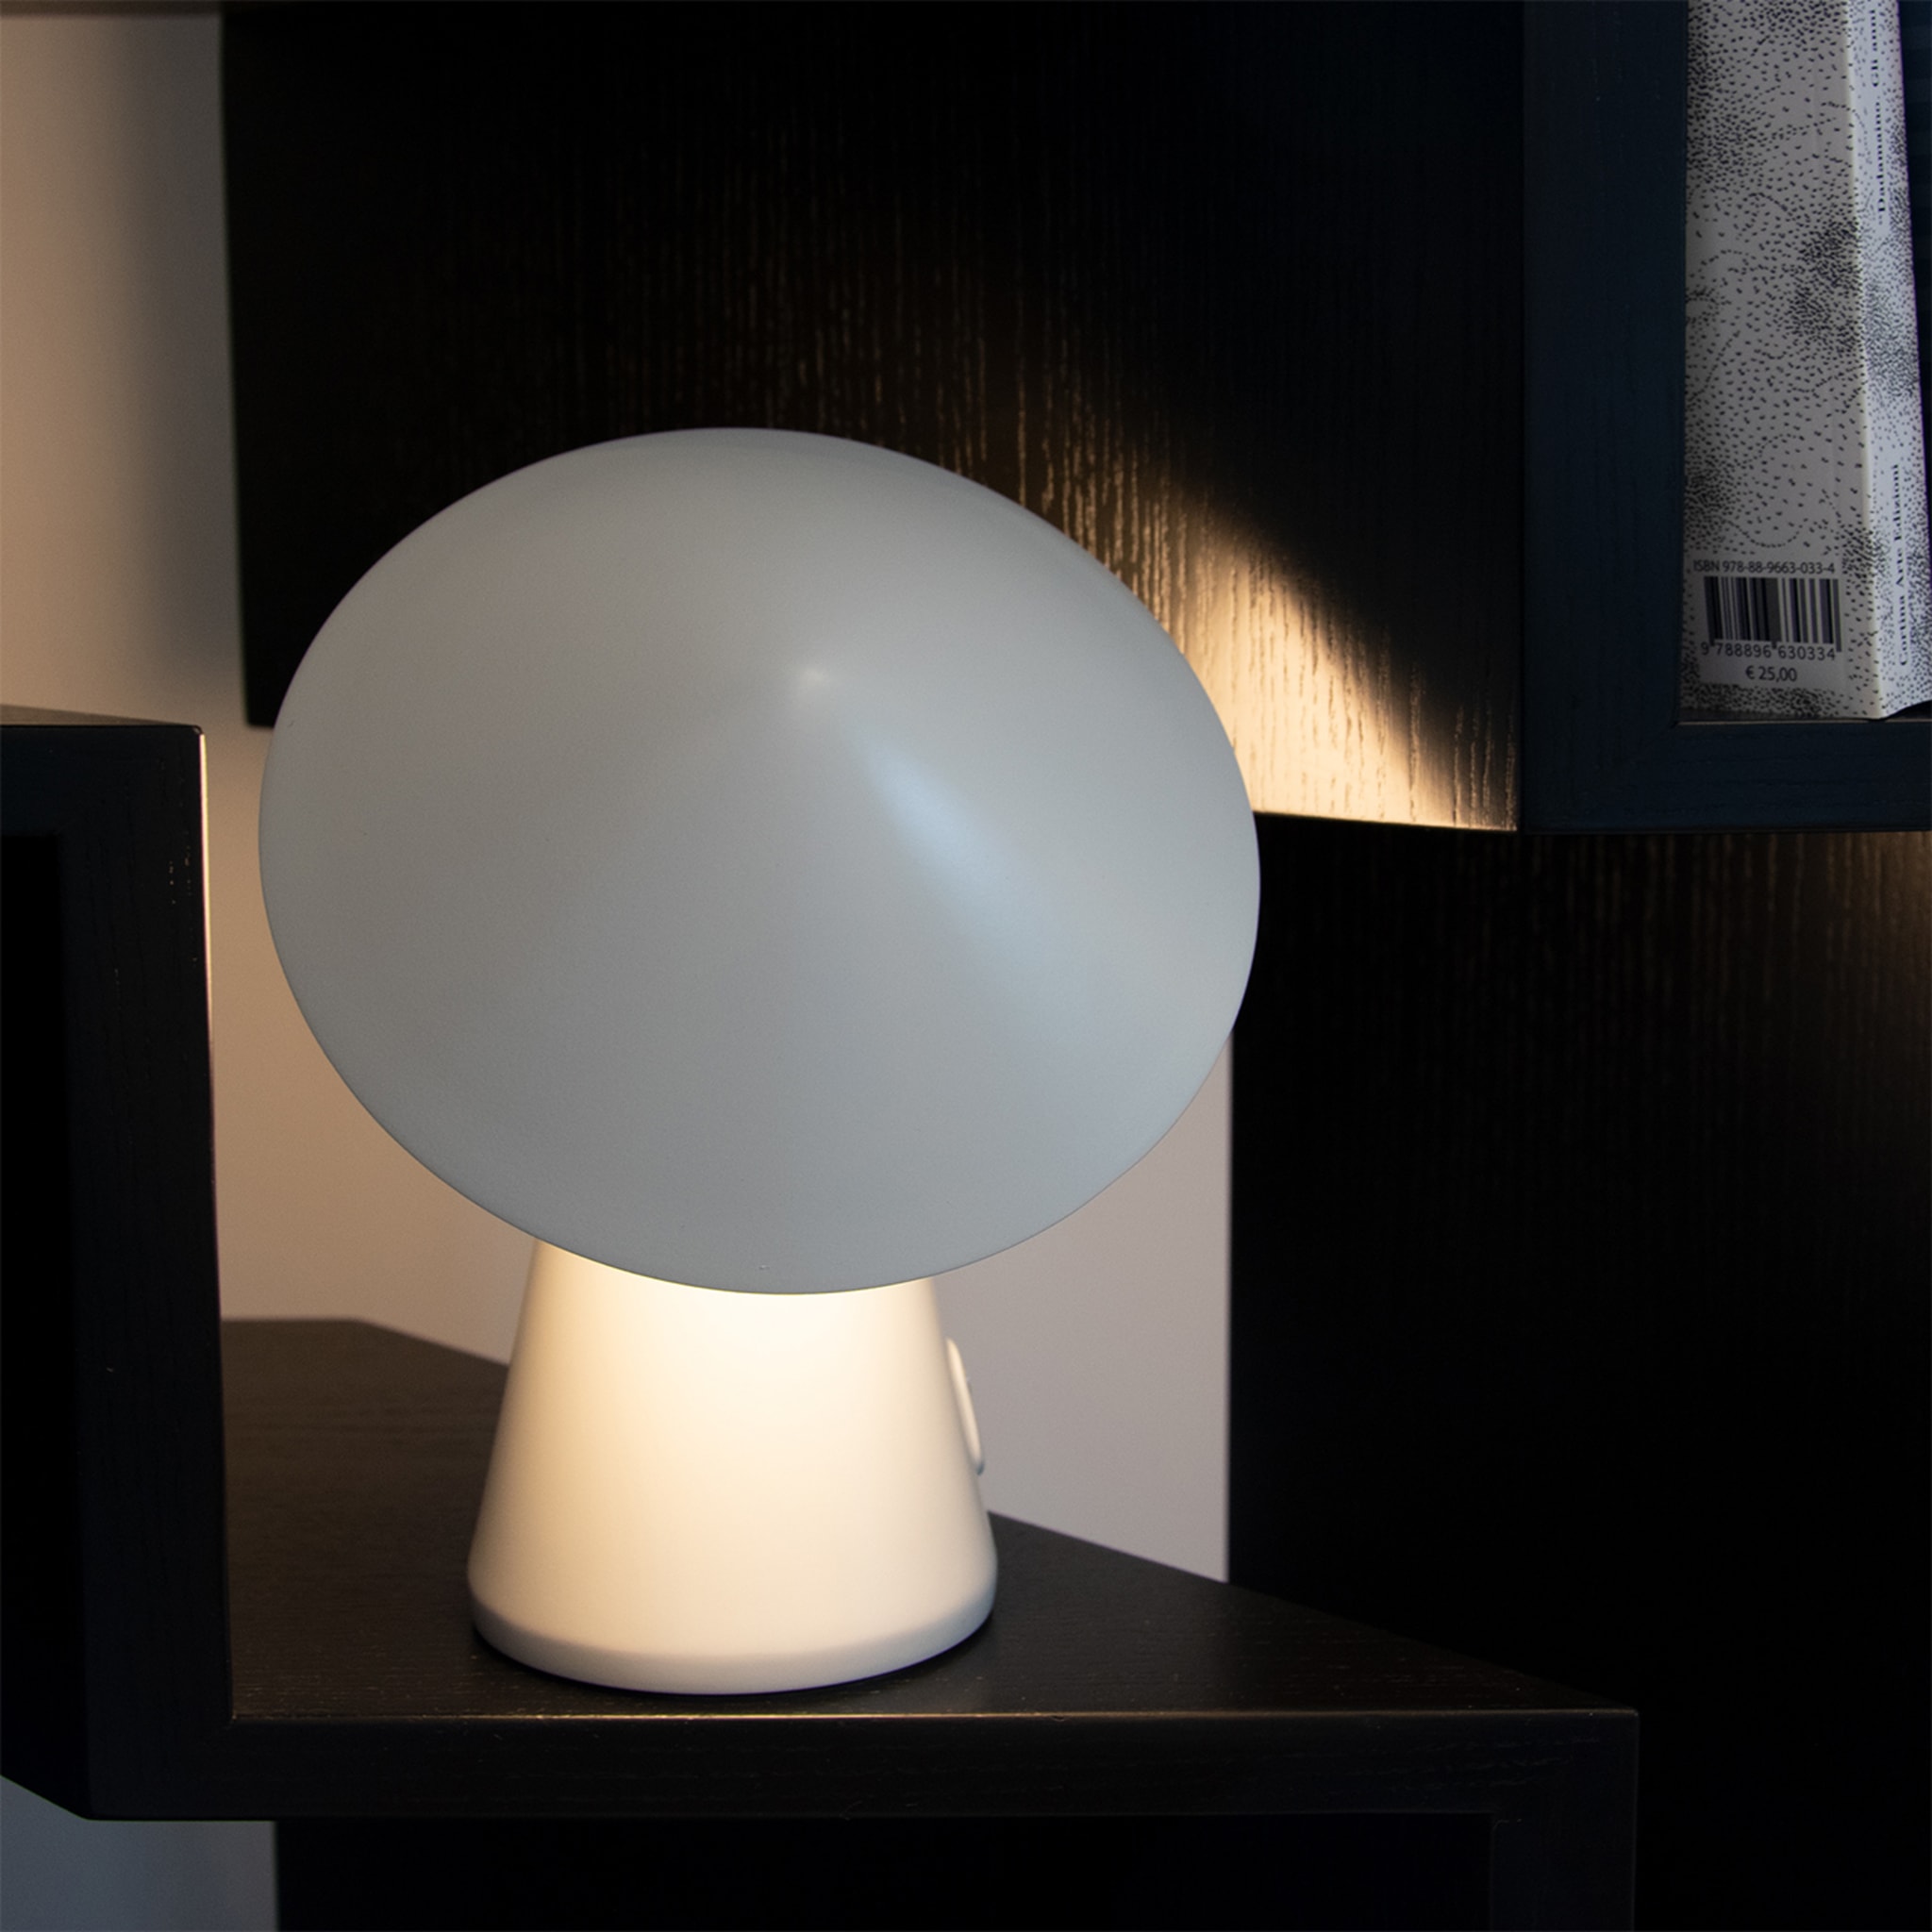 Puddy Gray Table Lamp by Albore Design - Alternative view 1